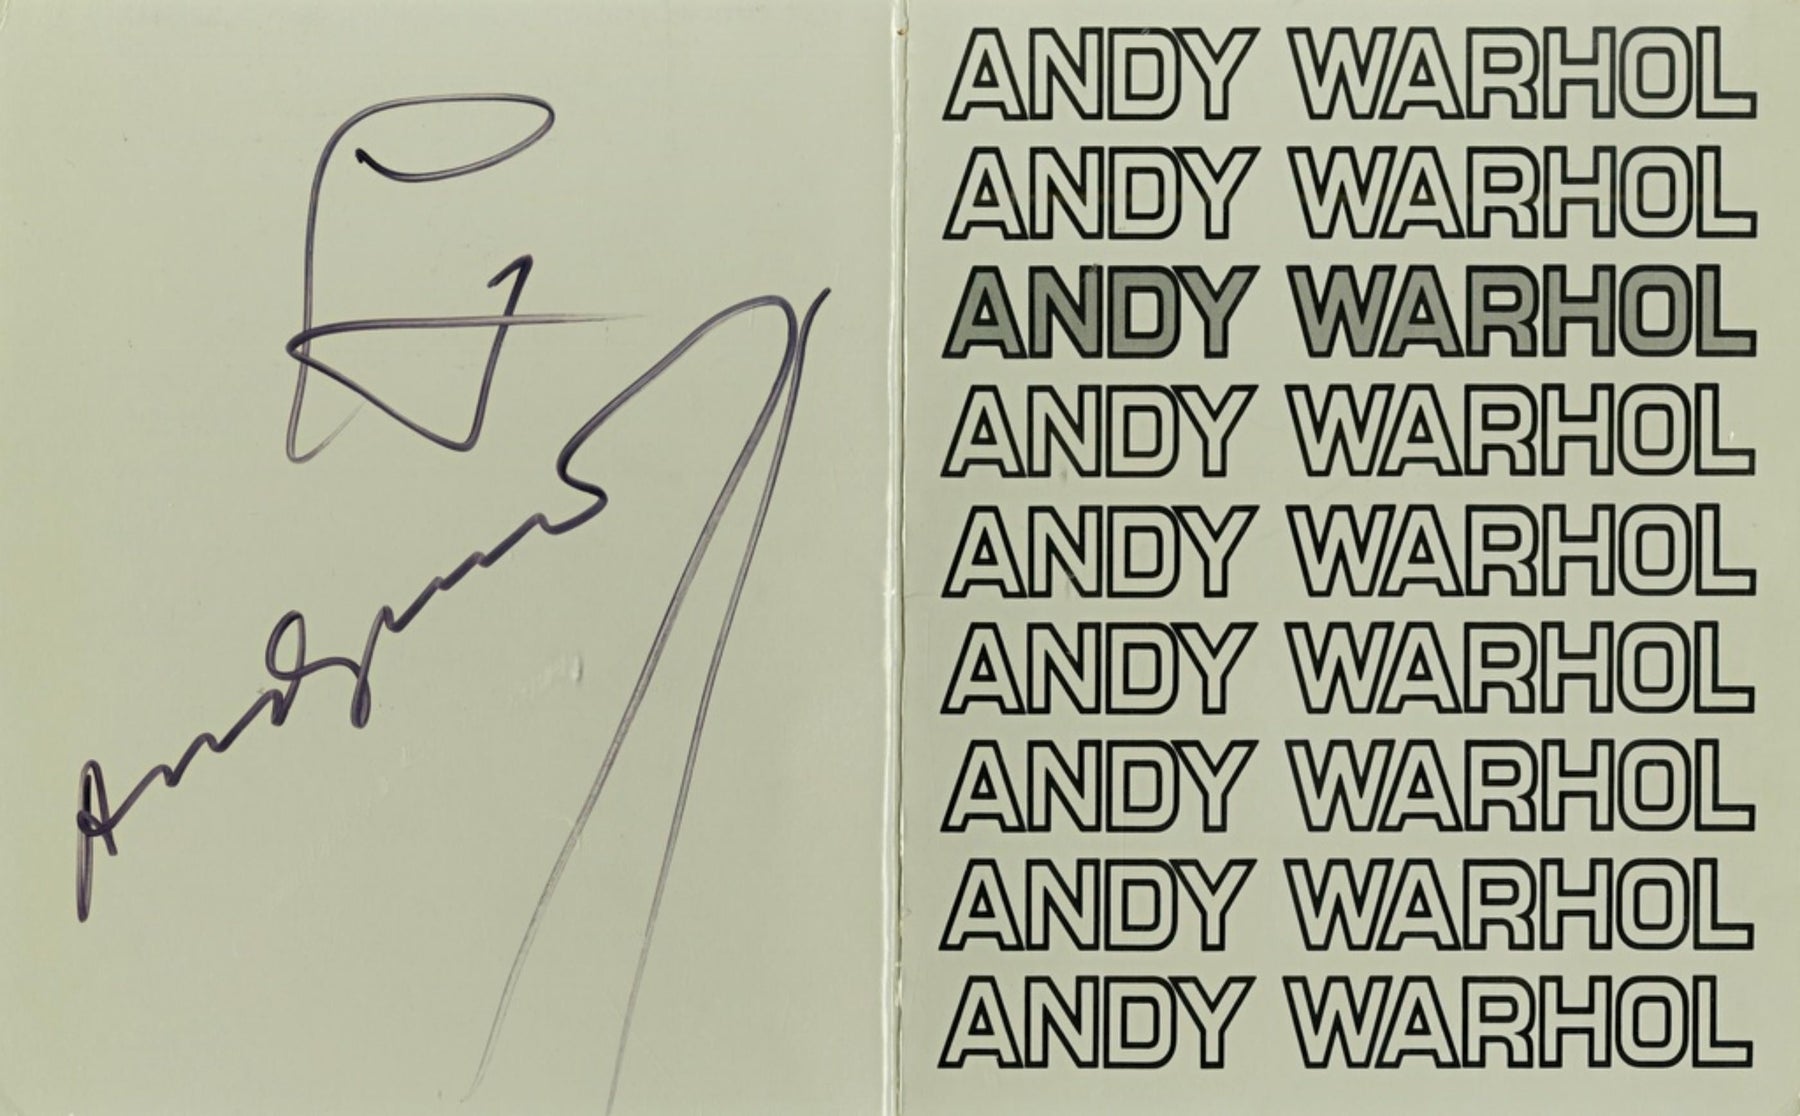 Andy Warhol's Signatures